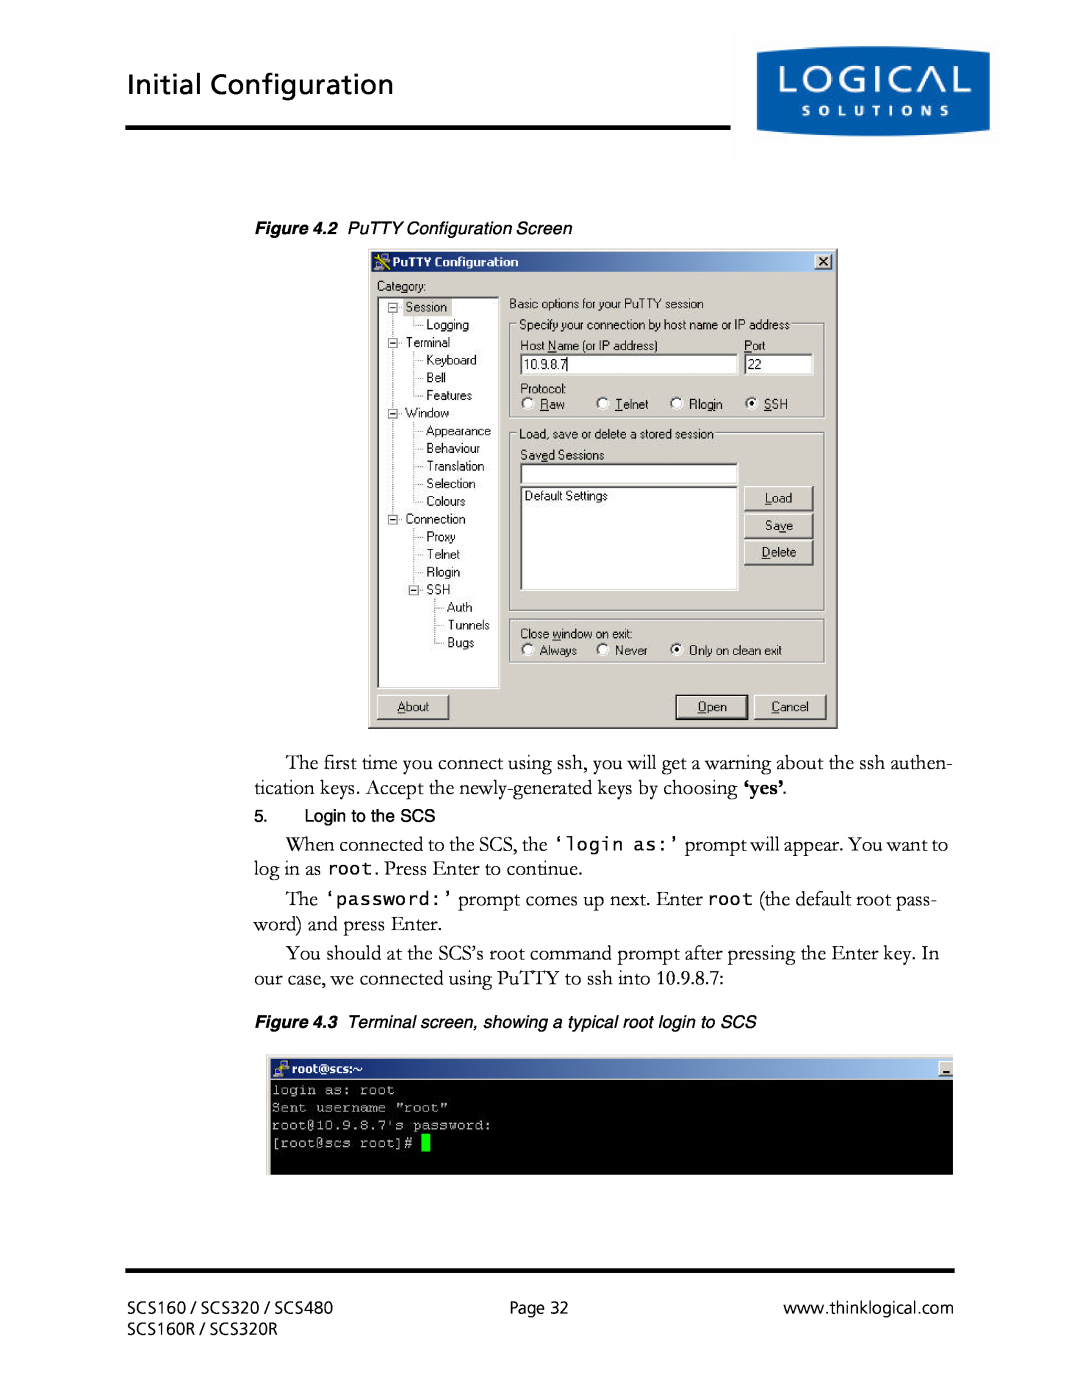 Logical Solutions SCS-R manual Initial Configuration, 2 PuTTY Configuration Screen, Login to the SCS 